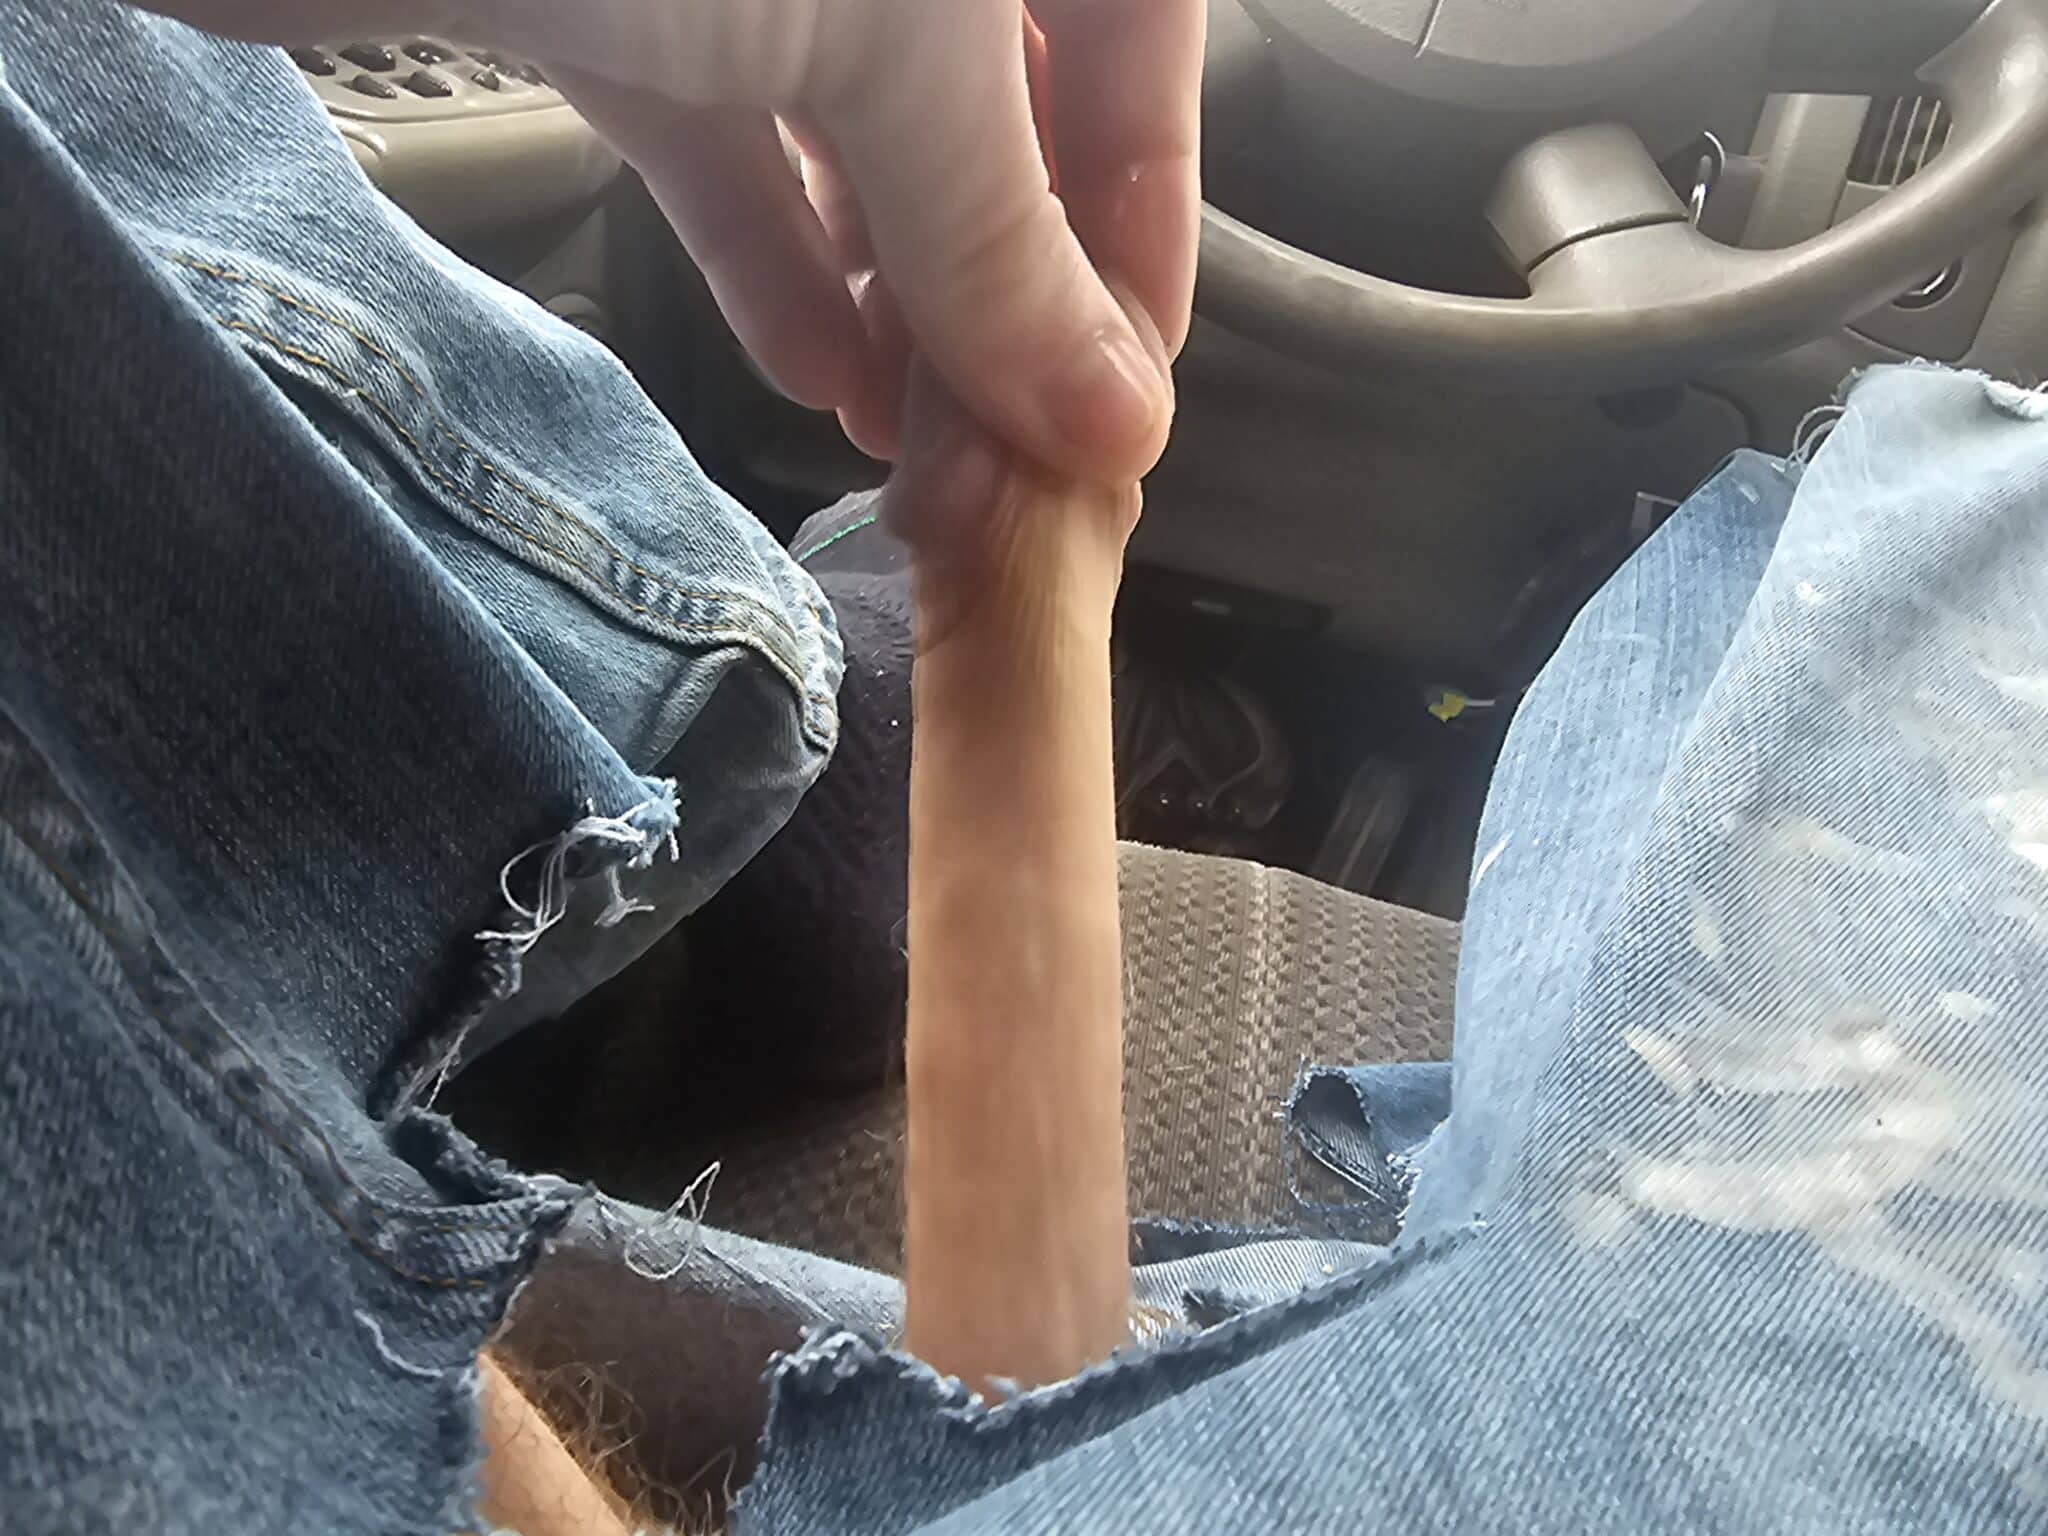 flasher dick - Dick in public Dick adventures - Real Amateurs